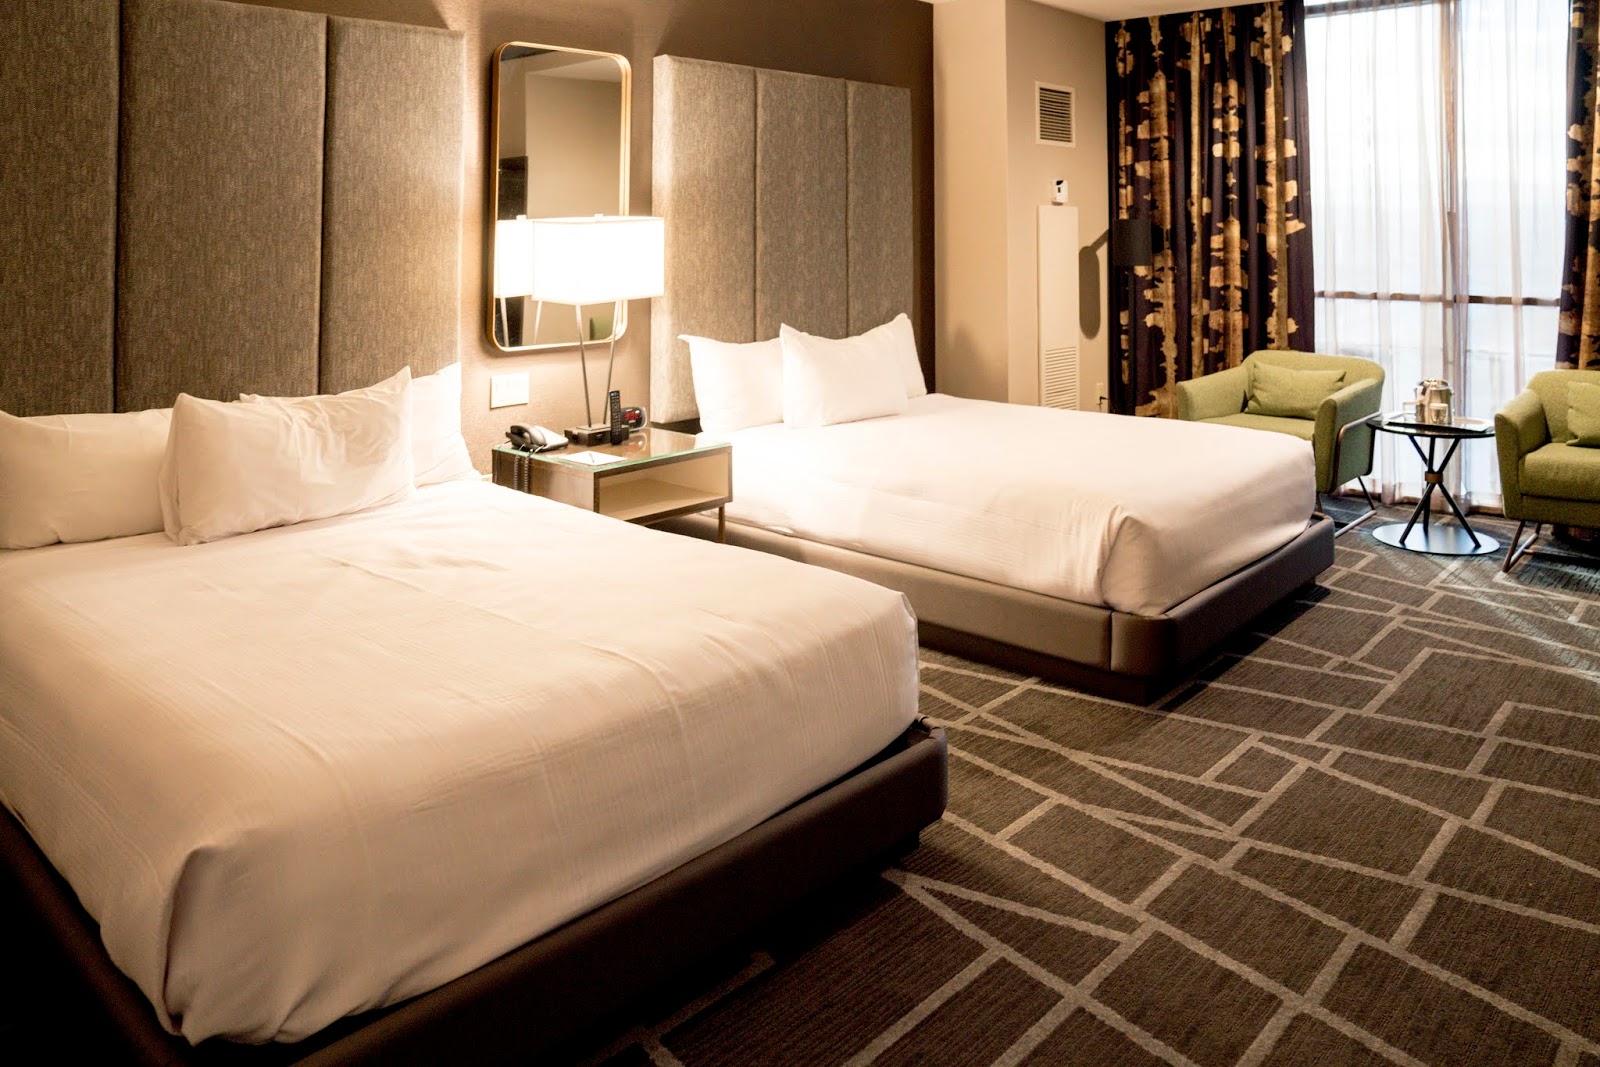 Luxor Hotel Las Vegas New Tower Room Review The Wacky Duo